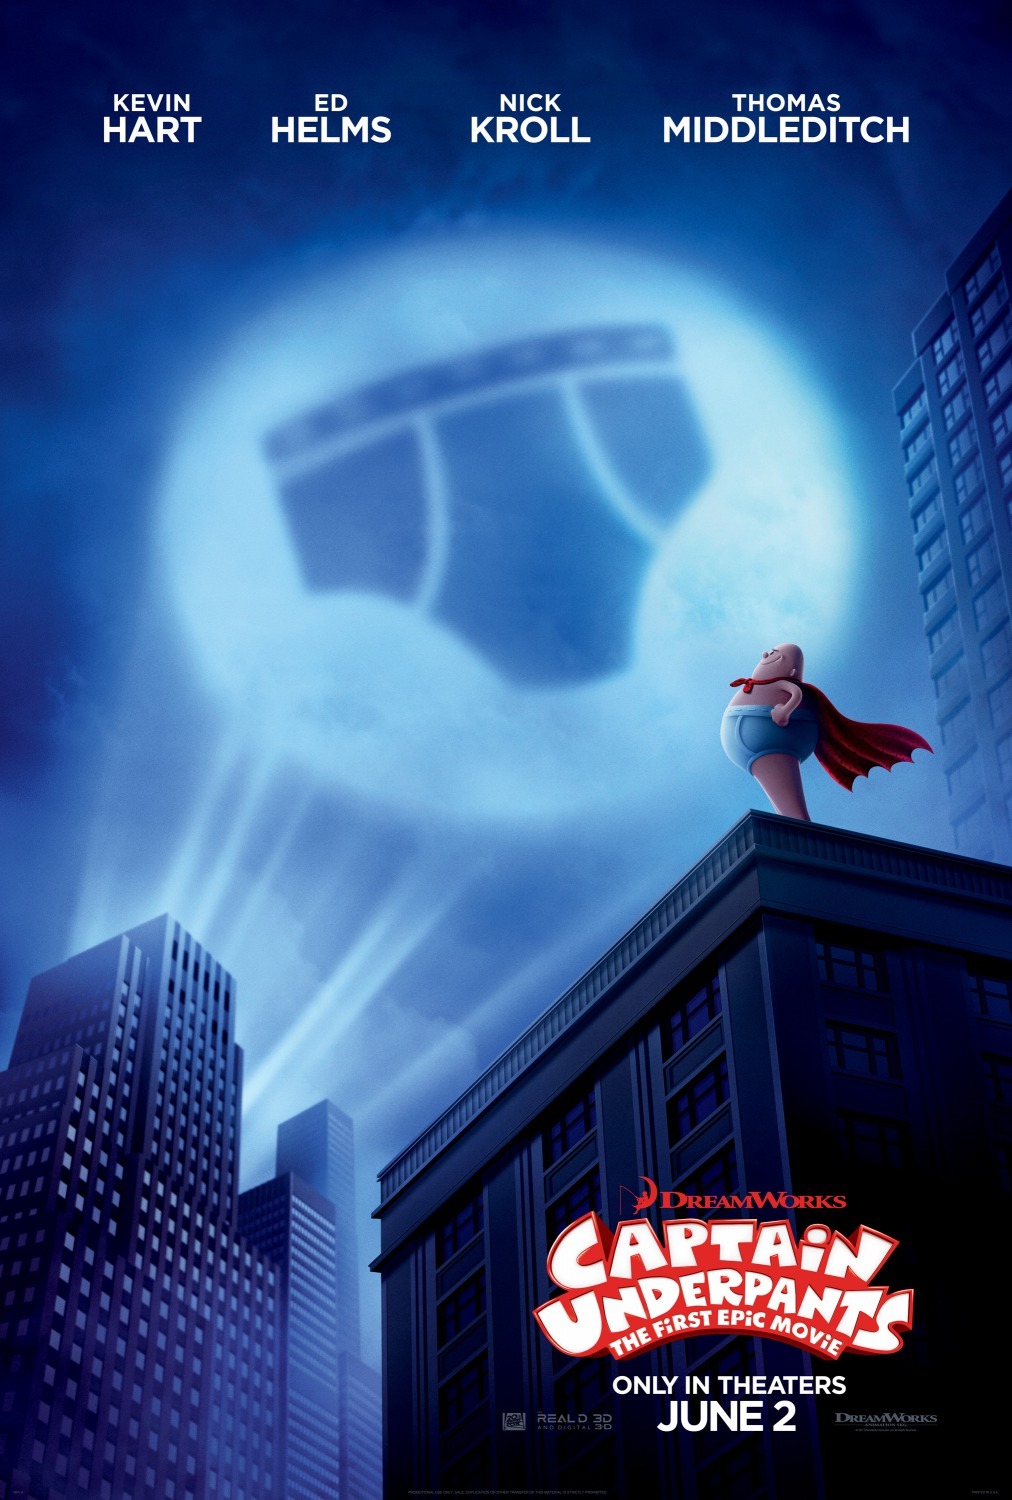 Captain Underpants: The First Epic Movie 2017 - Full (HD)